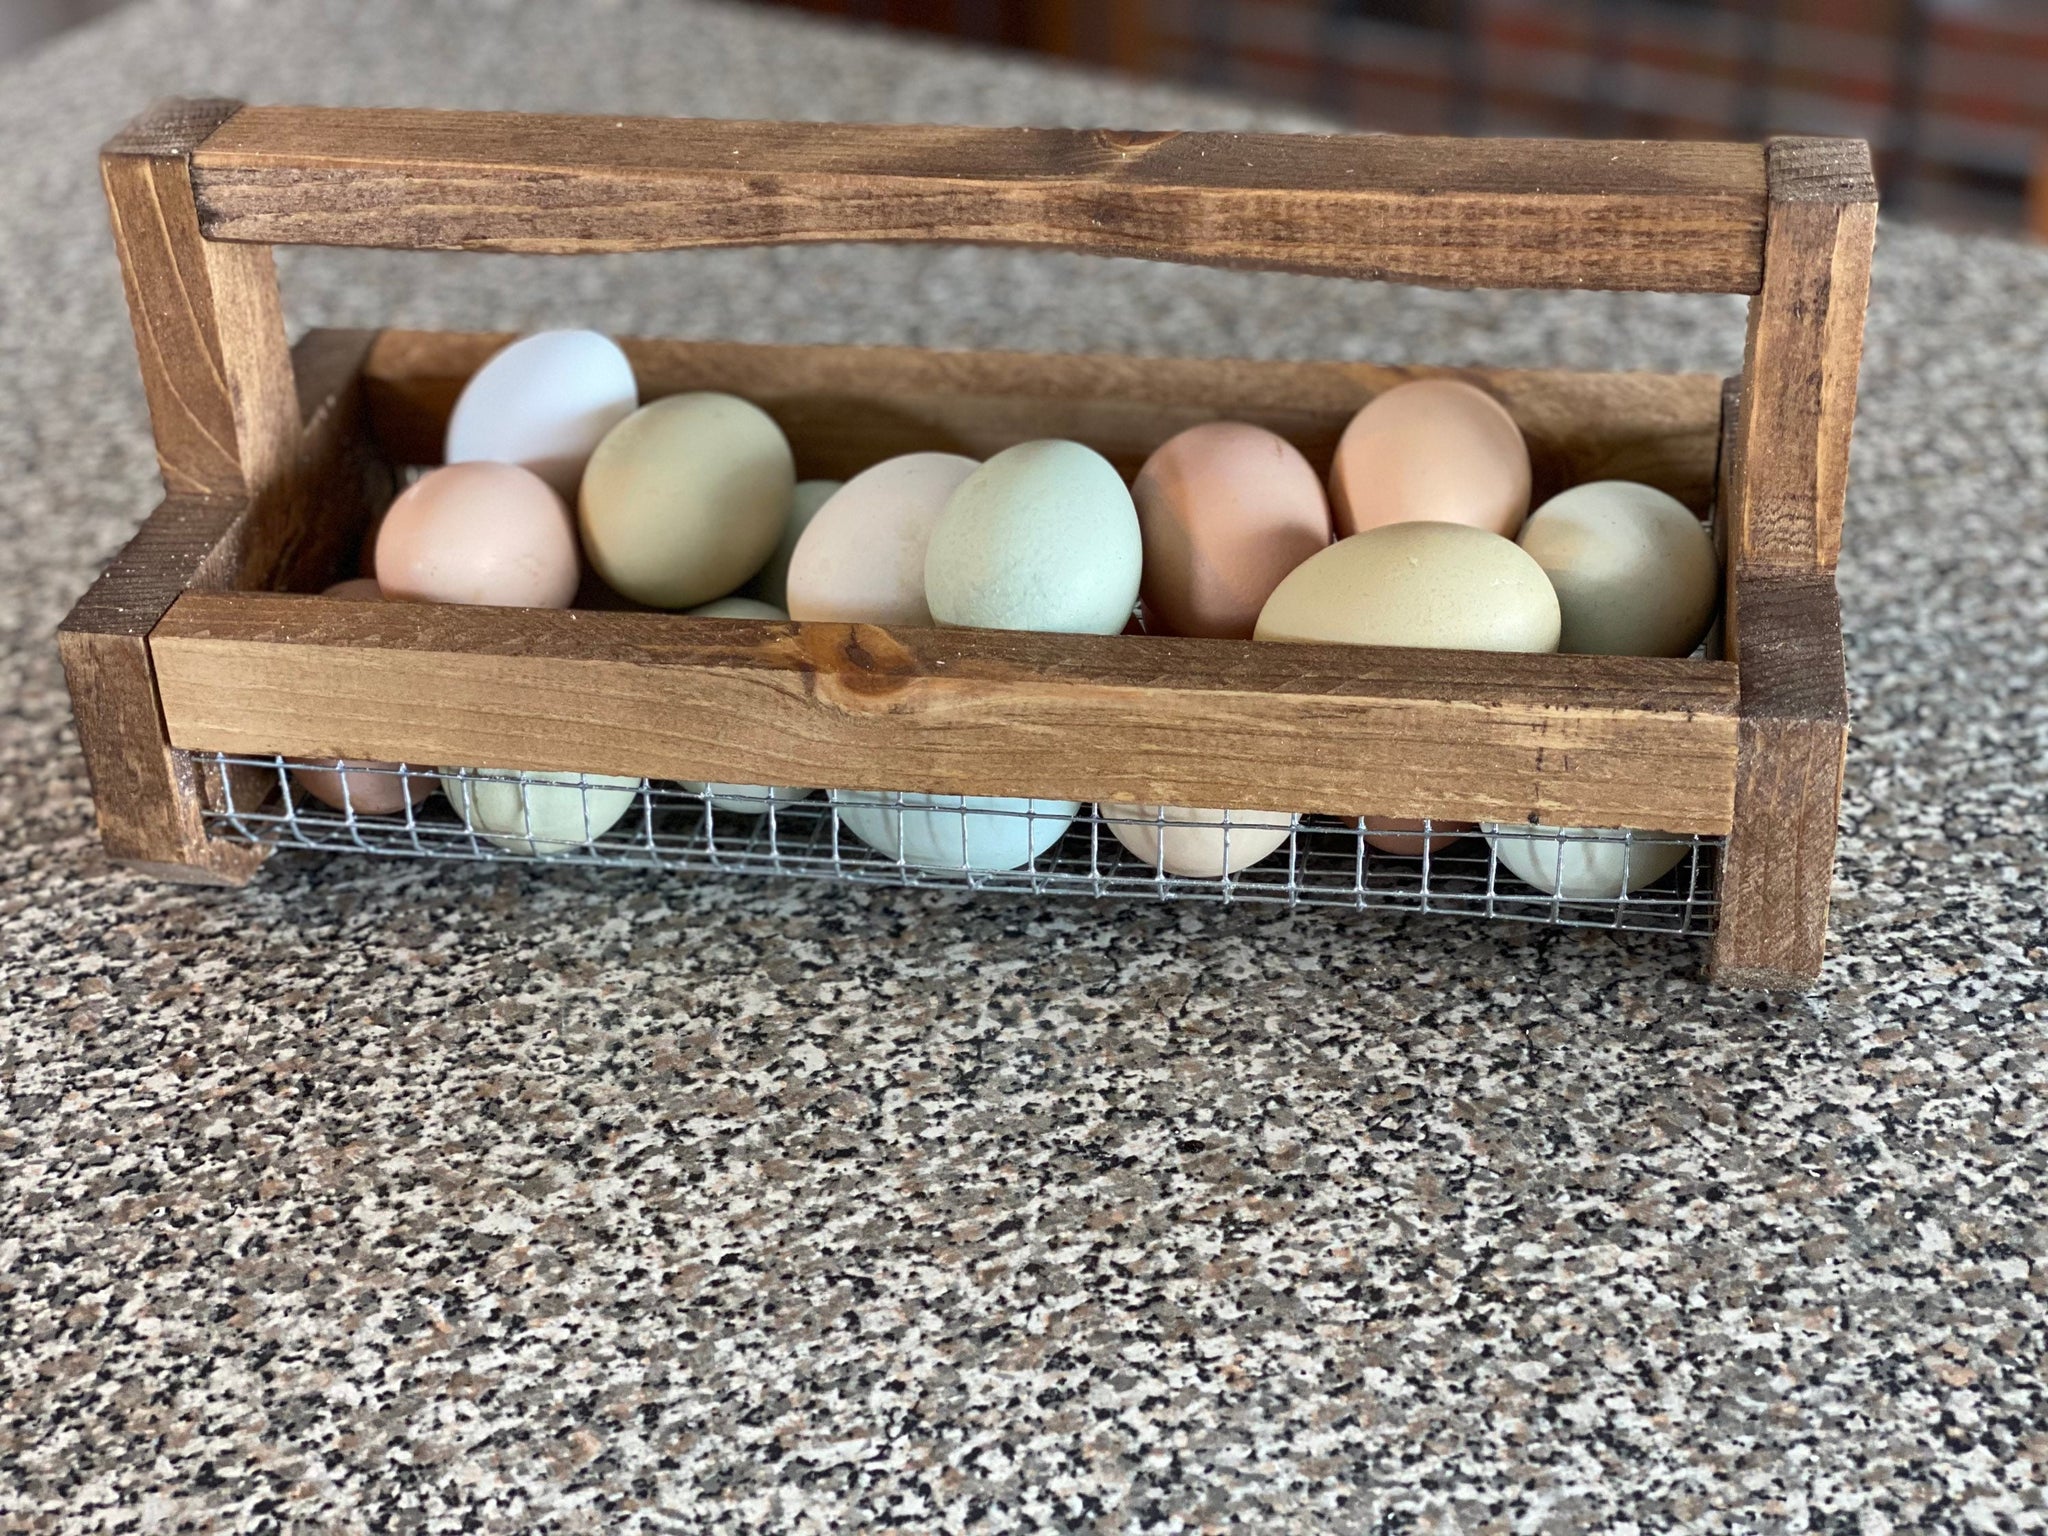 ChasBete Rustic Egg Basket Display Tray Holder for Gathering